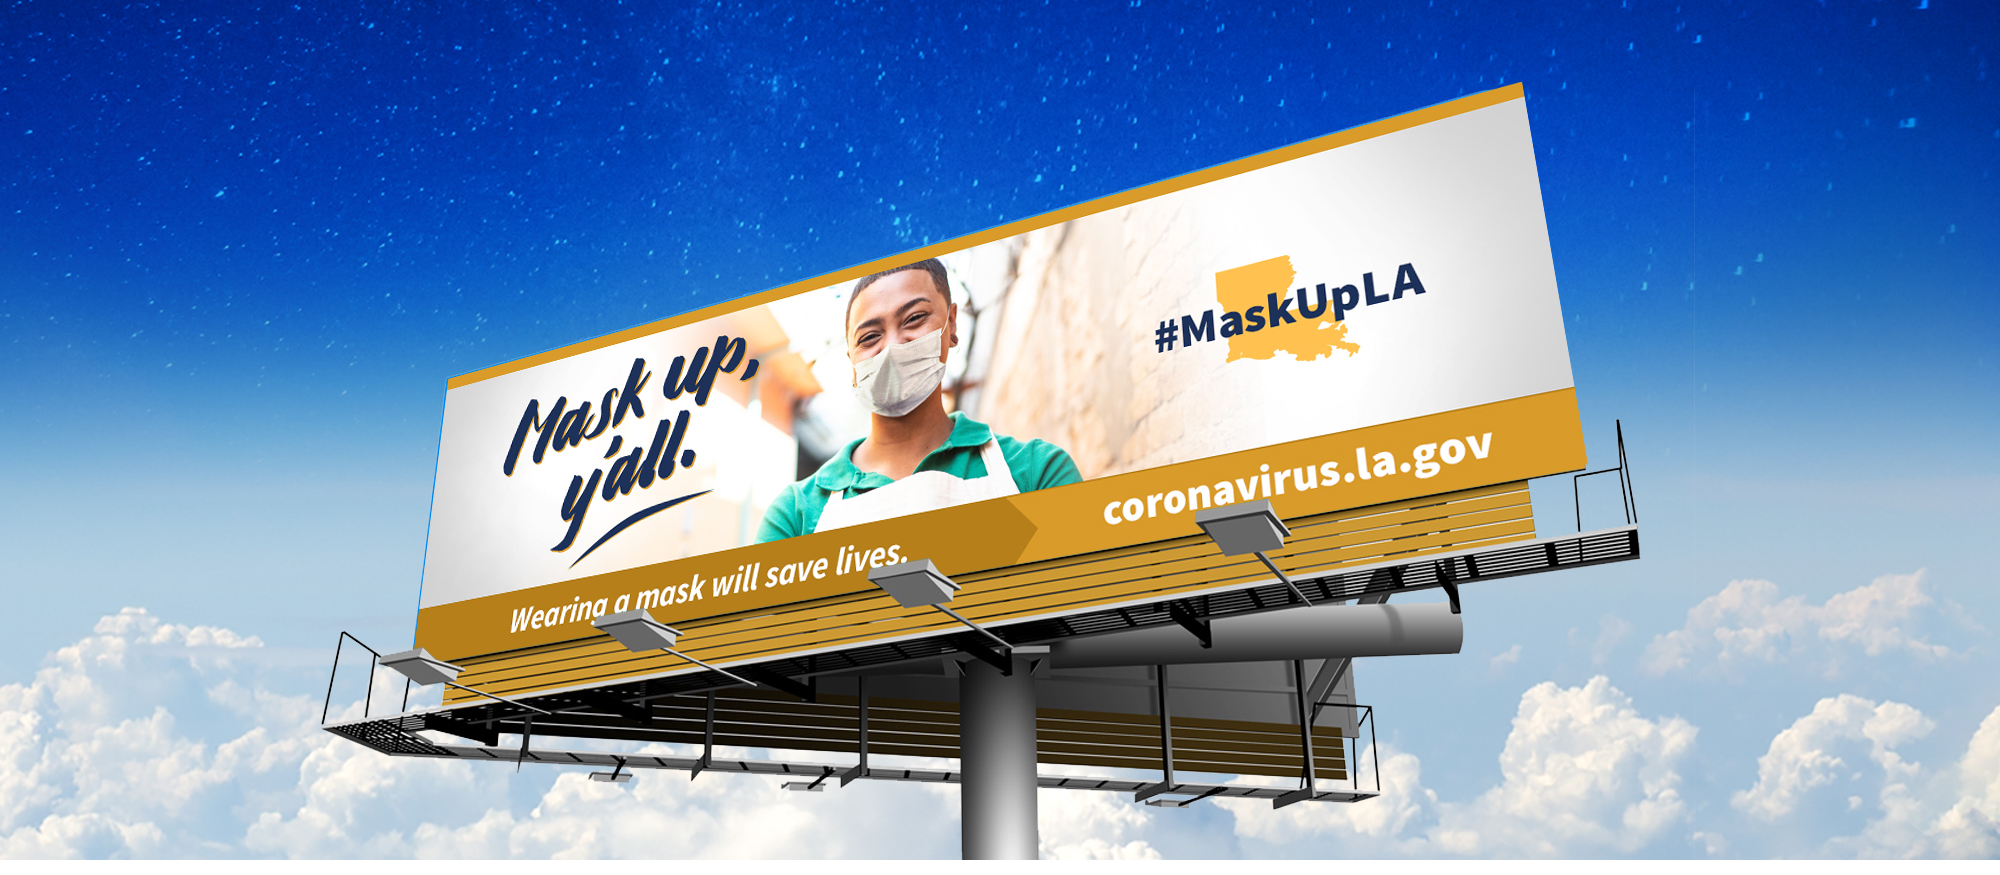 Office of the Governor "Mask-up" Campaign